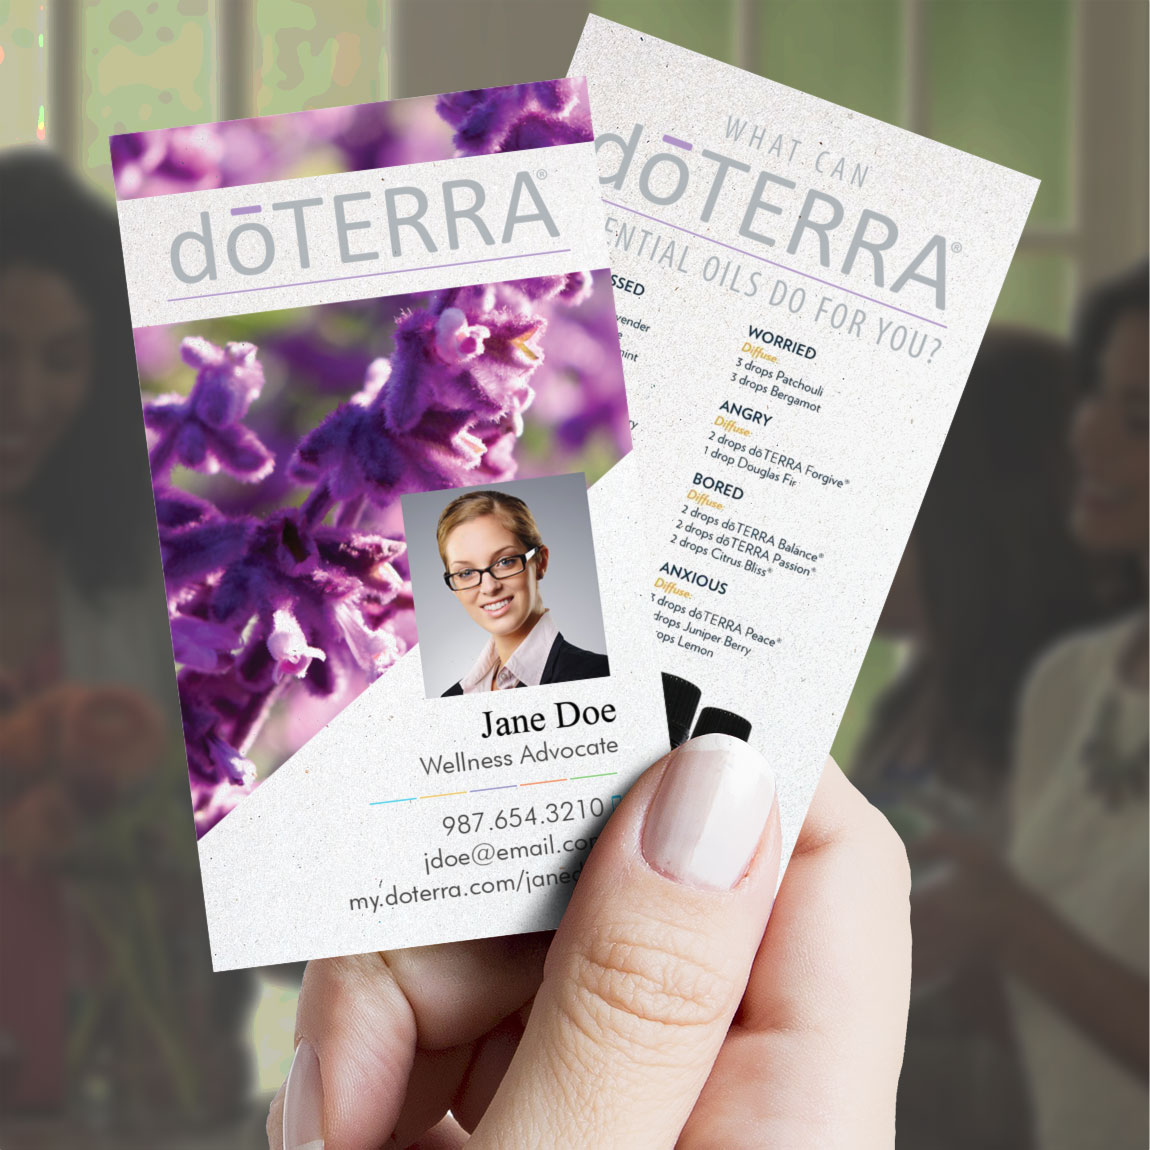 How to Order doTERRA Business Cards